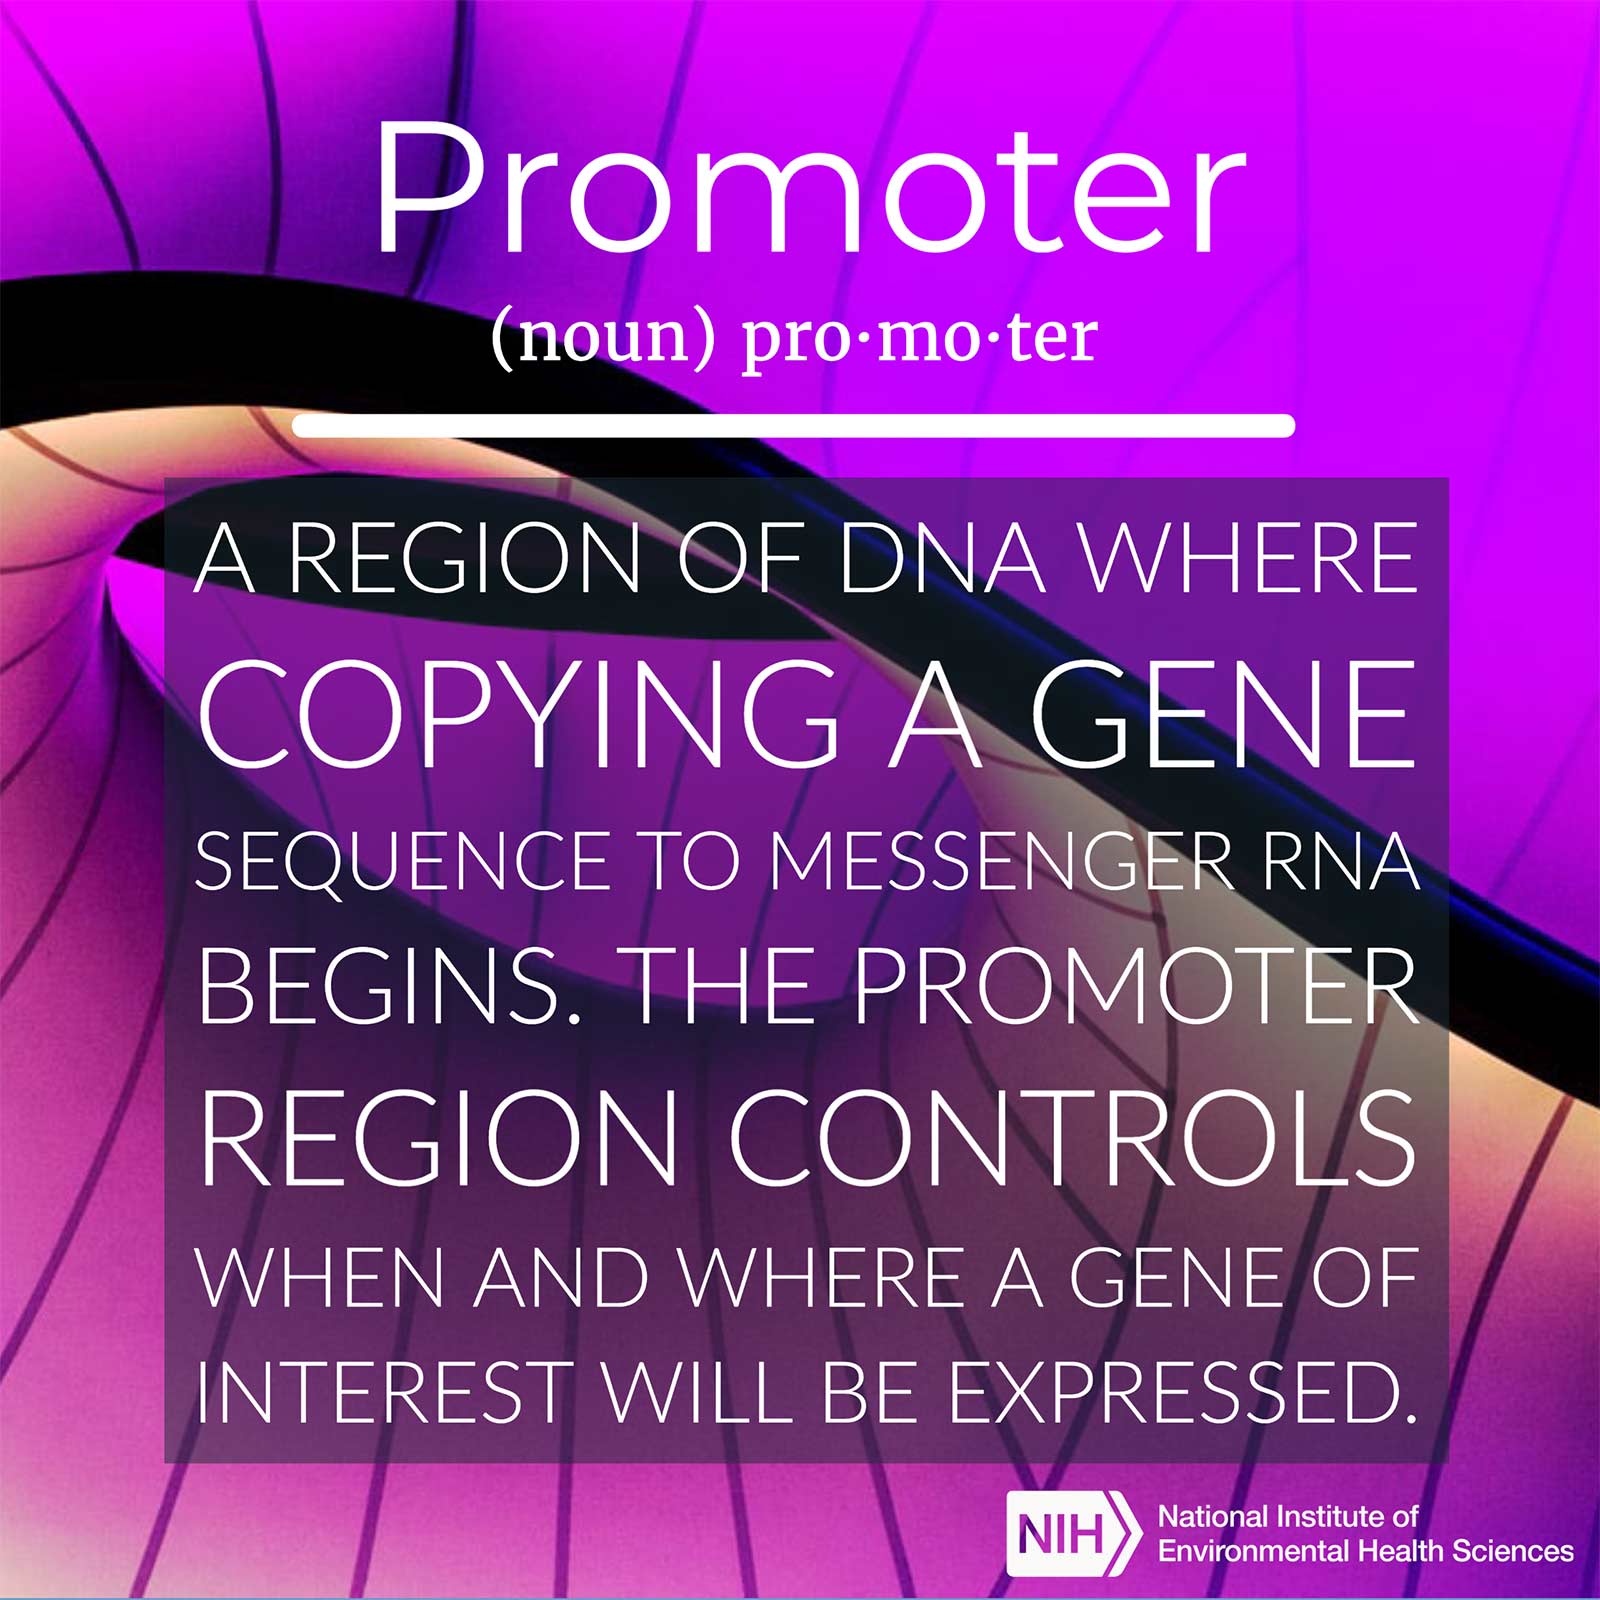 Promoter (noun) defined as 'a region of DNA where copying a gene sequence to messenger RNA begins. The promoter region controls when and where a gene of interest will be expressed.'